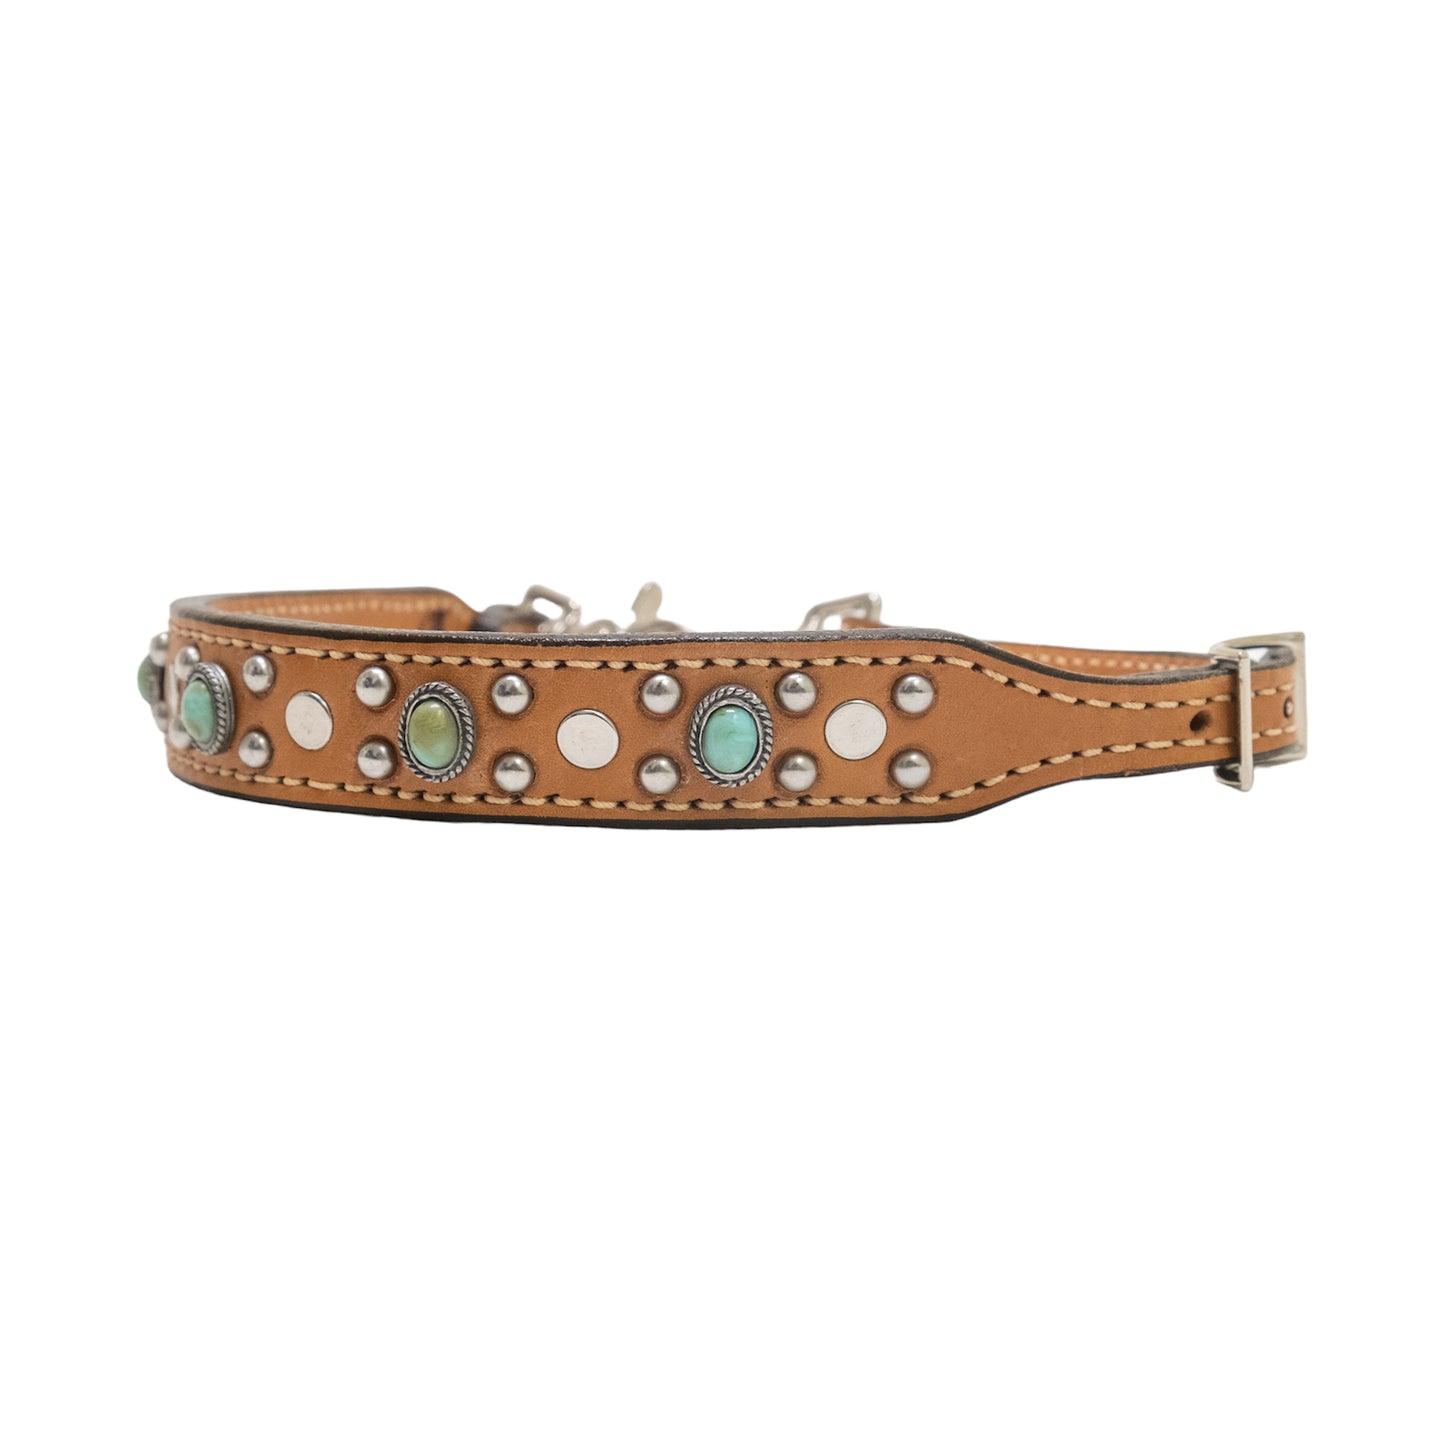 Wither strap rough out golden leather with turquoise stones and SS spots.